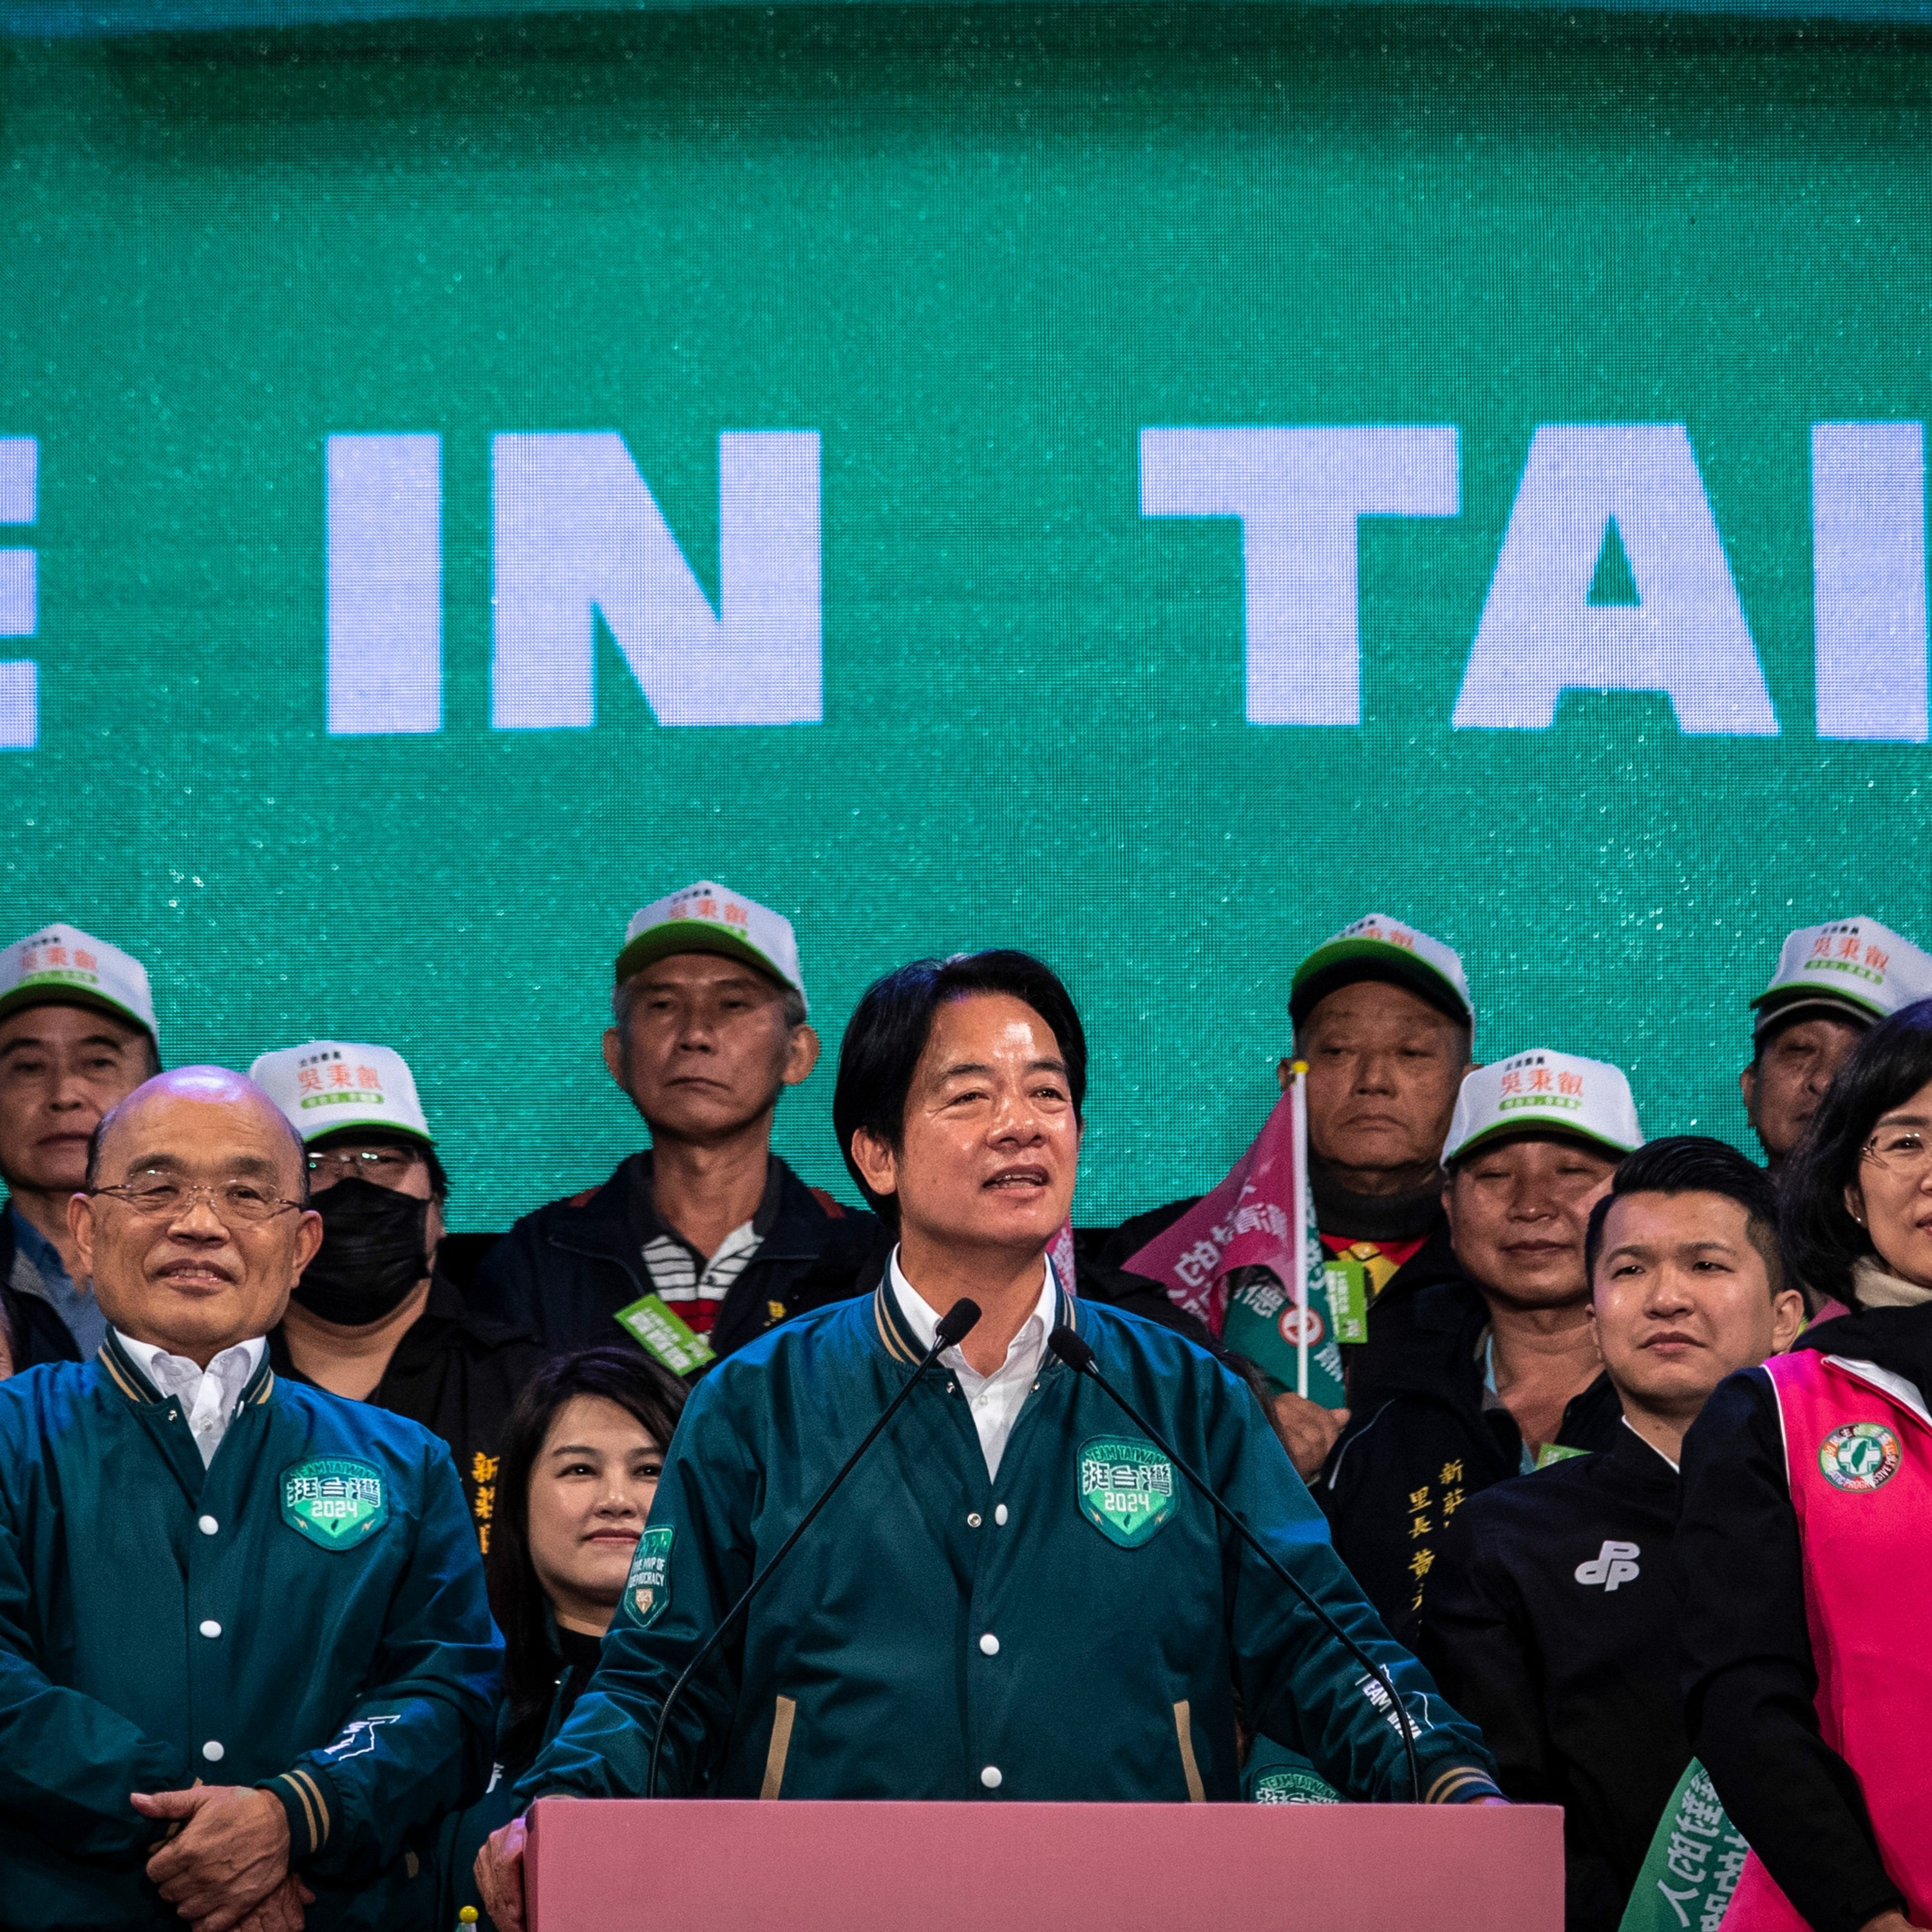 CER Podcast: The Taiwan election: China cares, but should Europe?